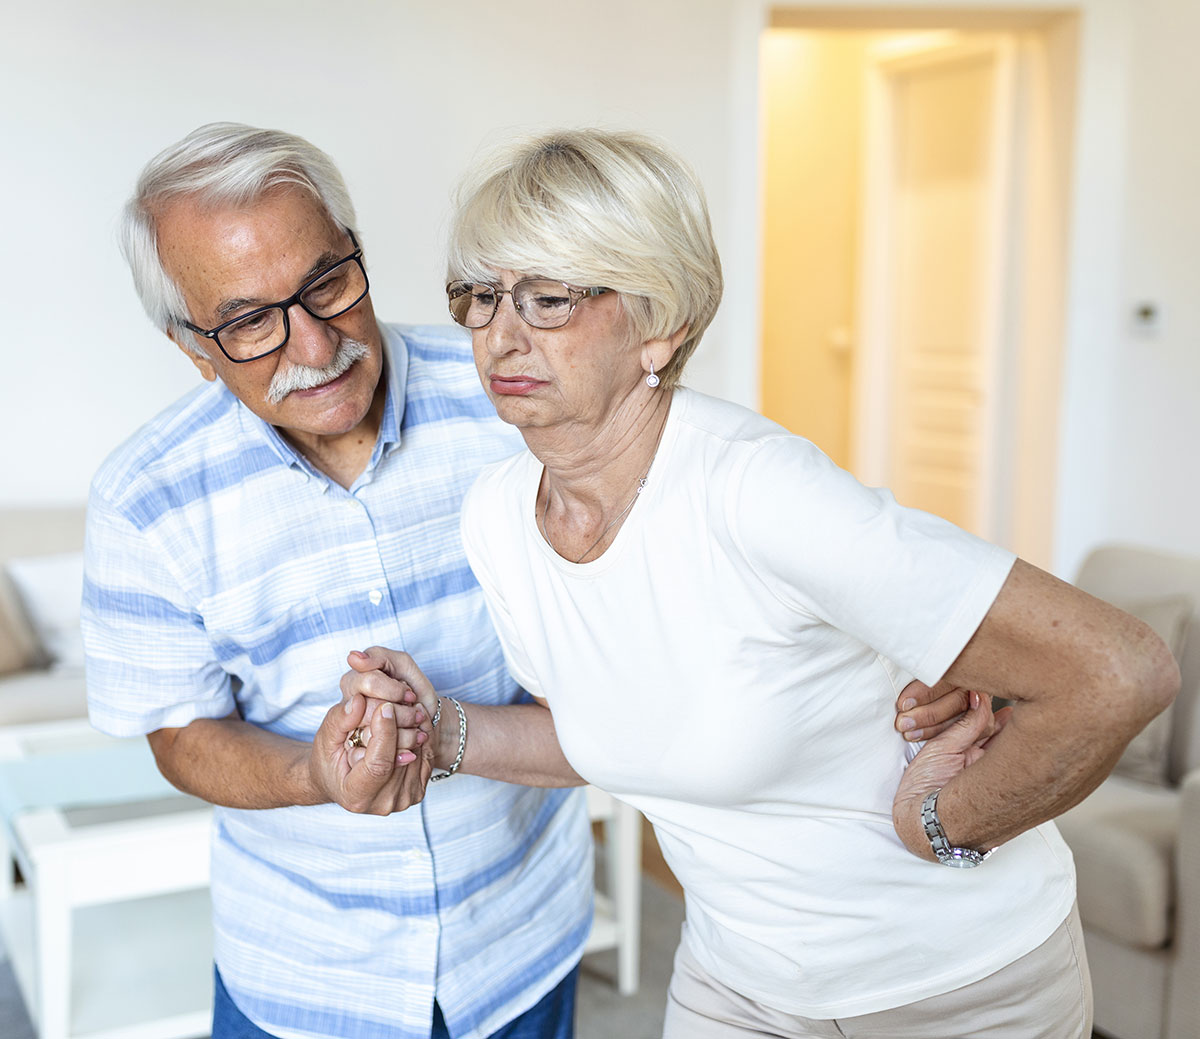 A senior old woman with back pain is supported by her husband illustrating the common risk factors for falls.